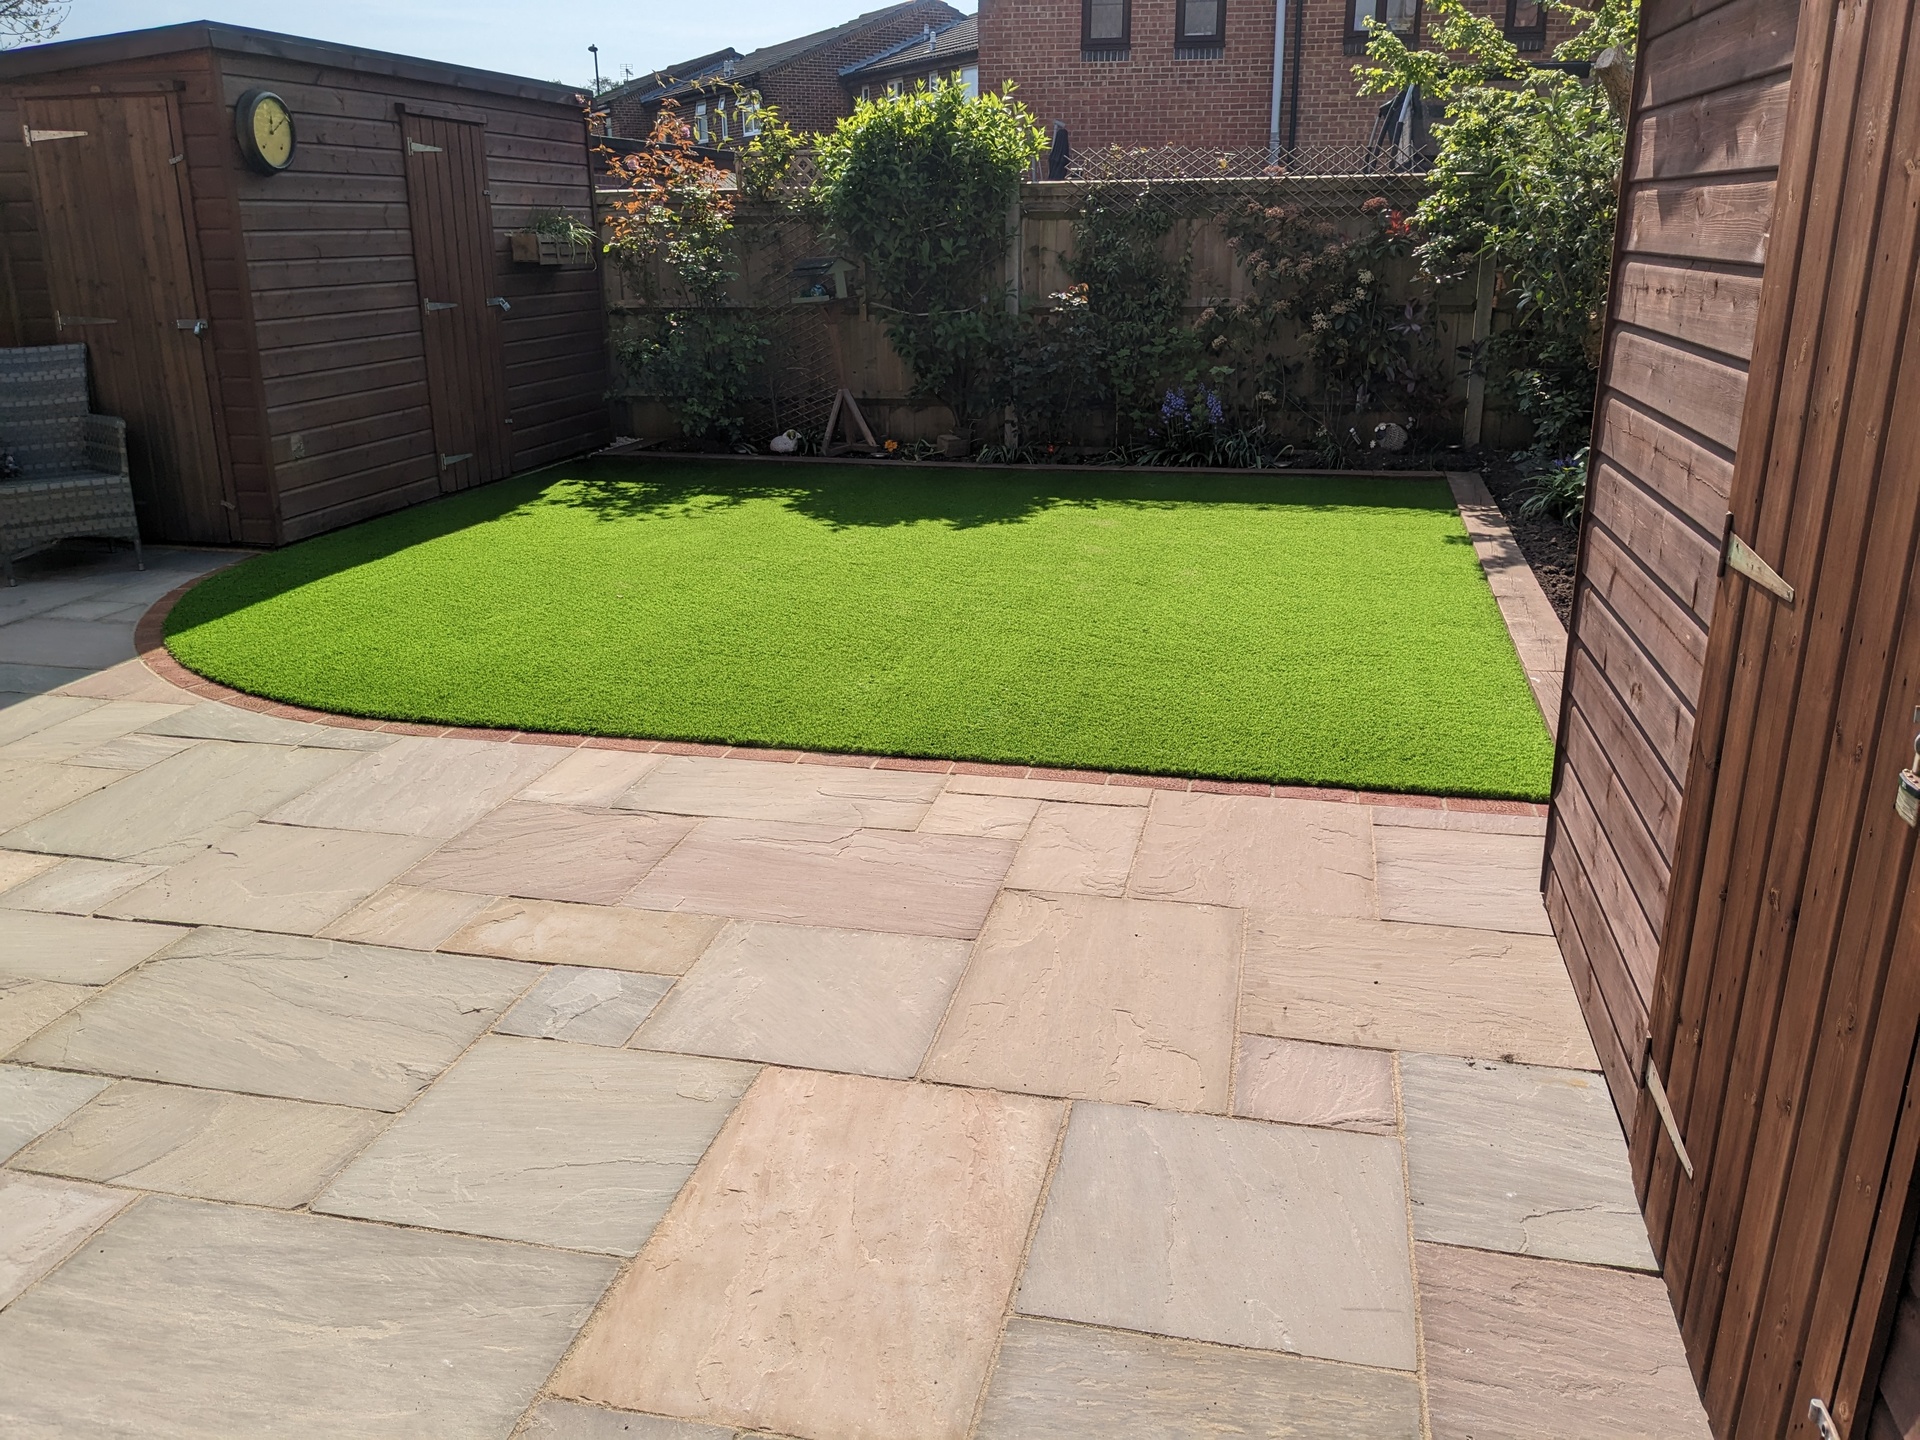 Back garden design and build with natural sandstone paving and artificial grass, sleepers and brick edging